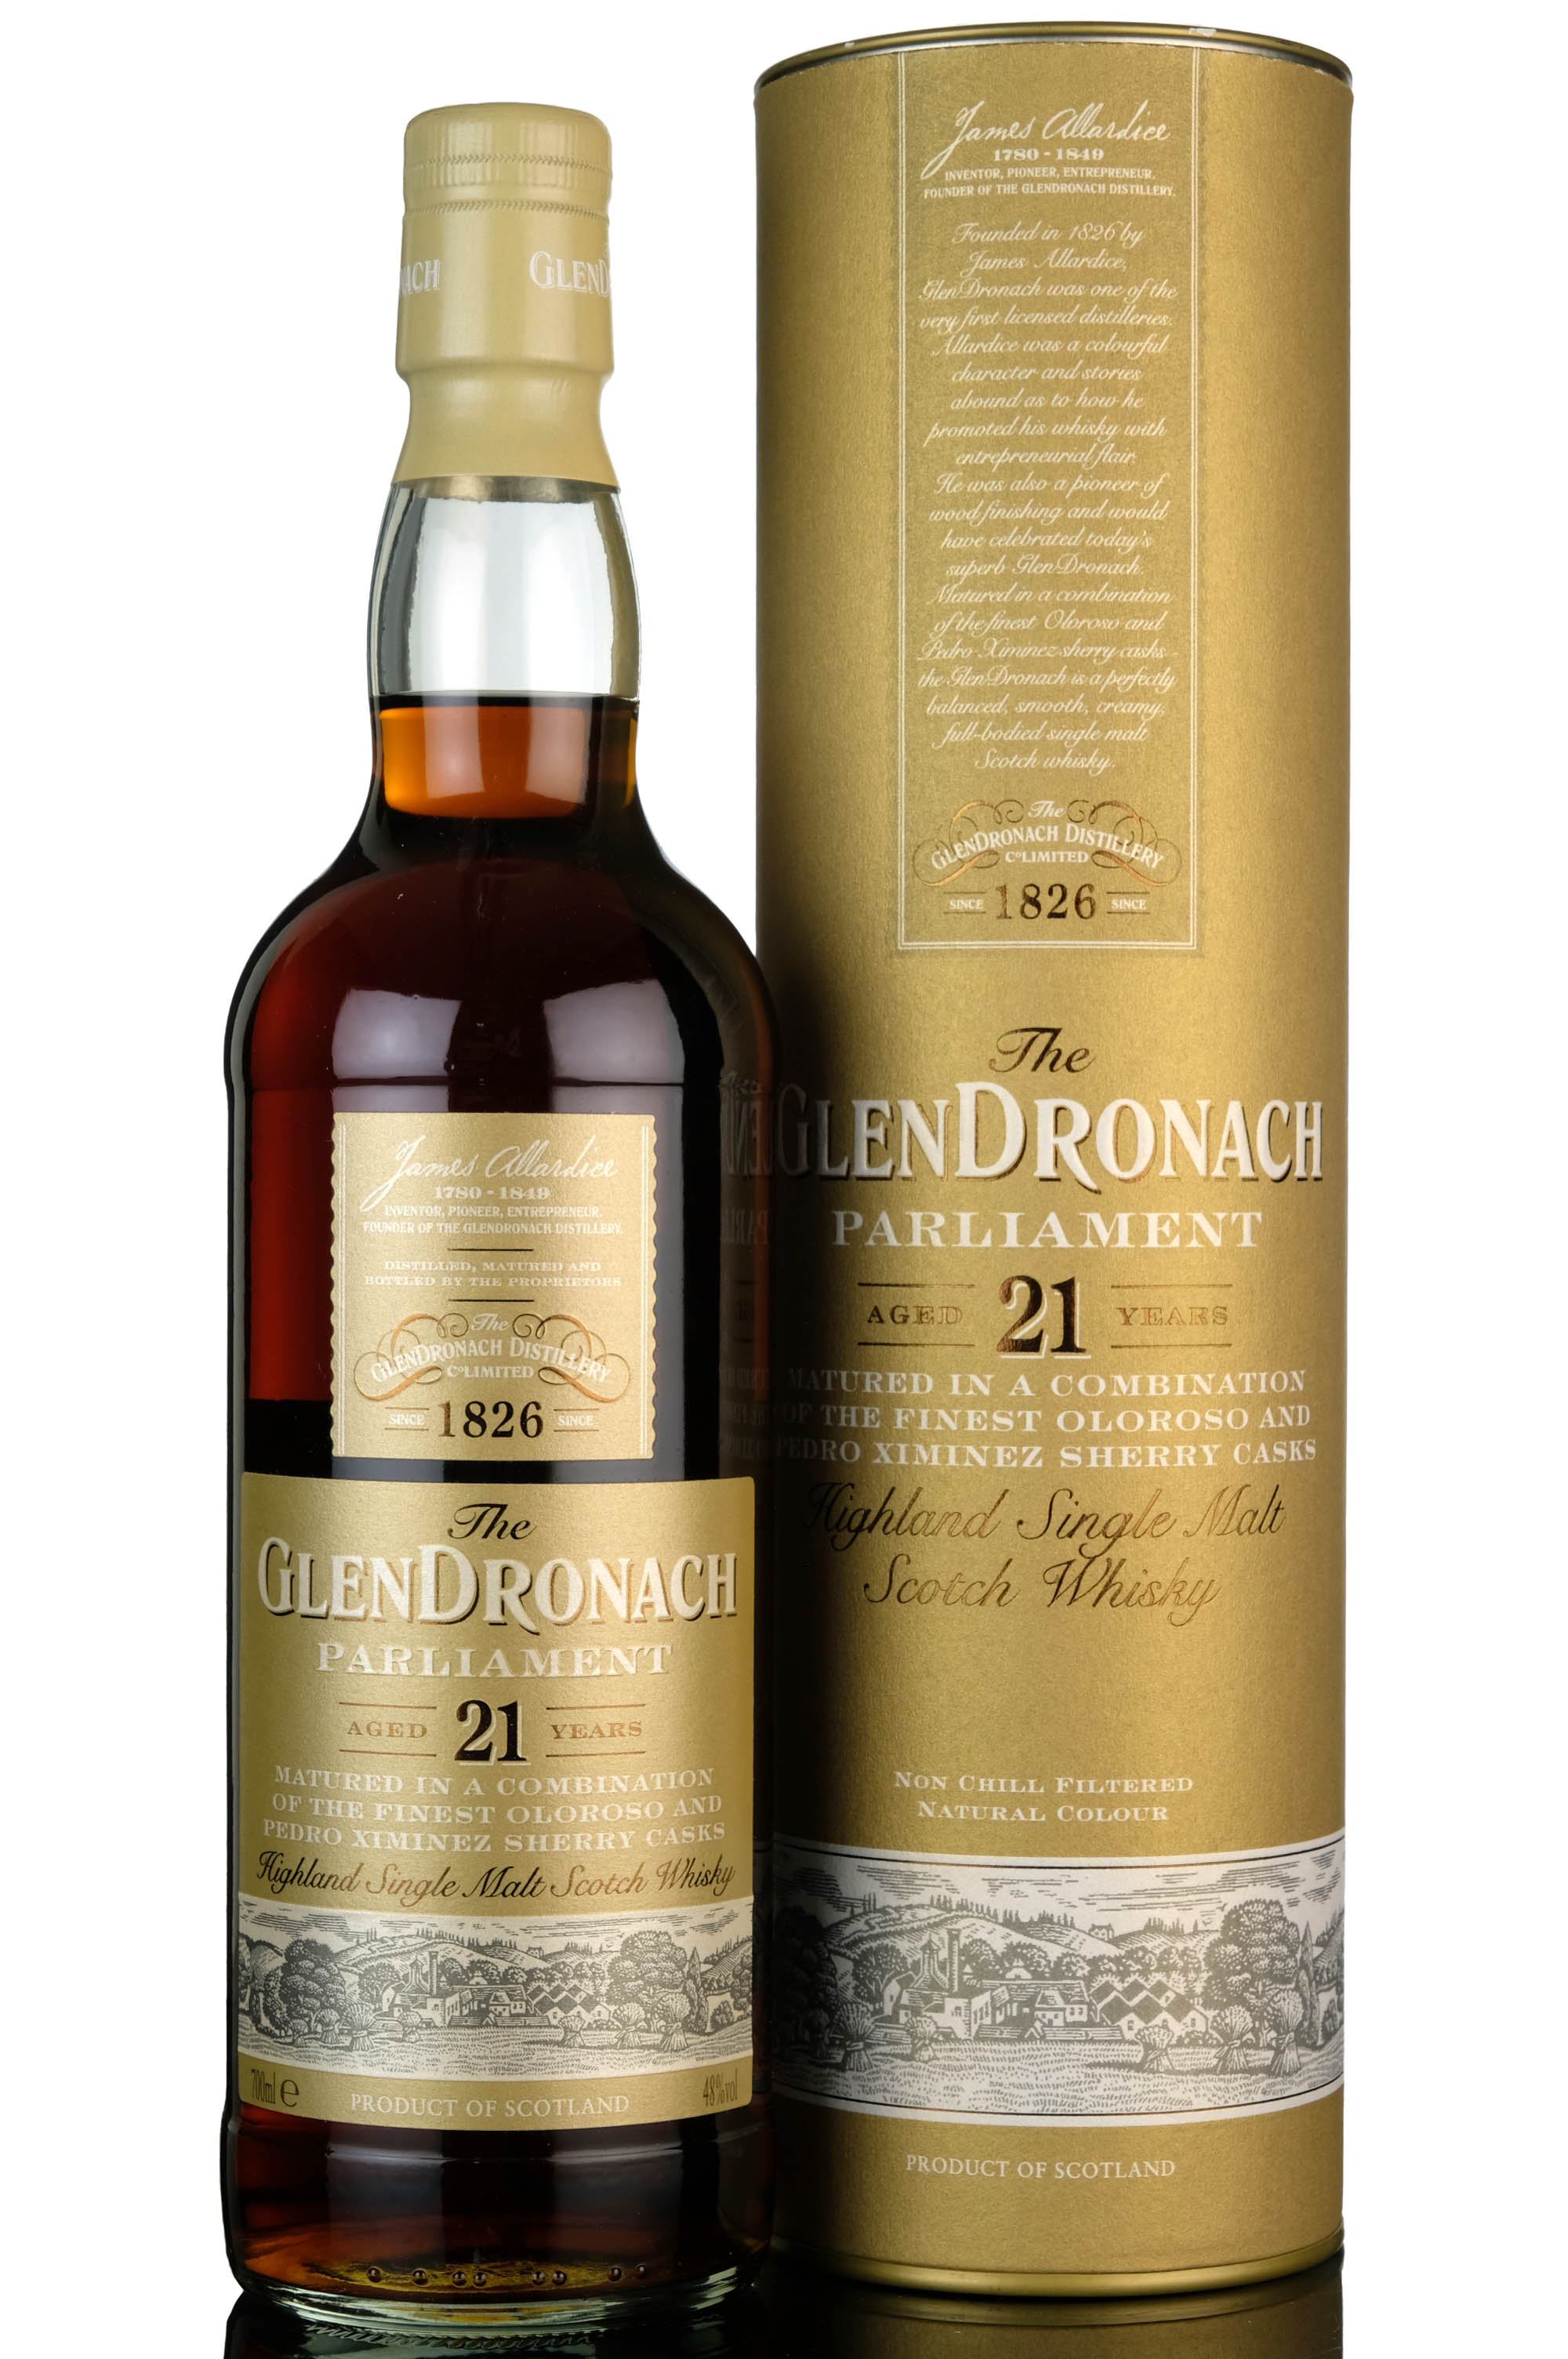 Glendronach 21 Year Old - Parliament - 2012 Release